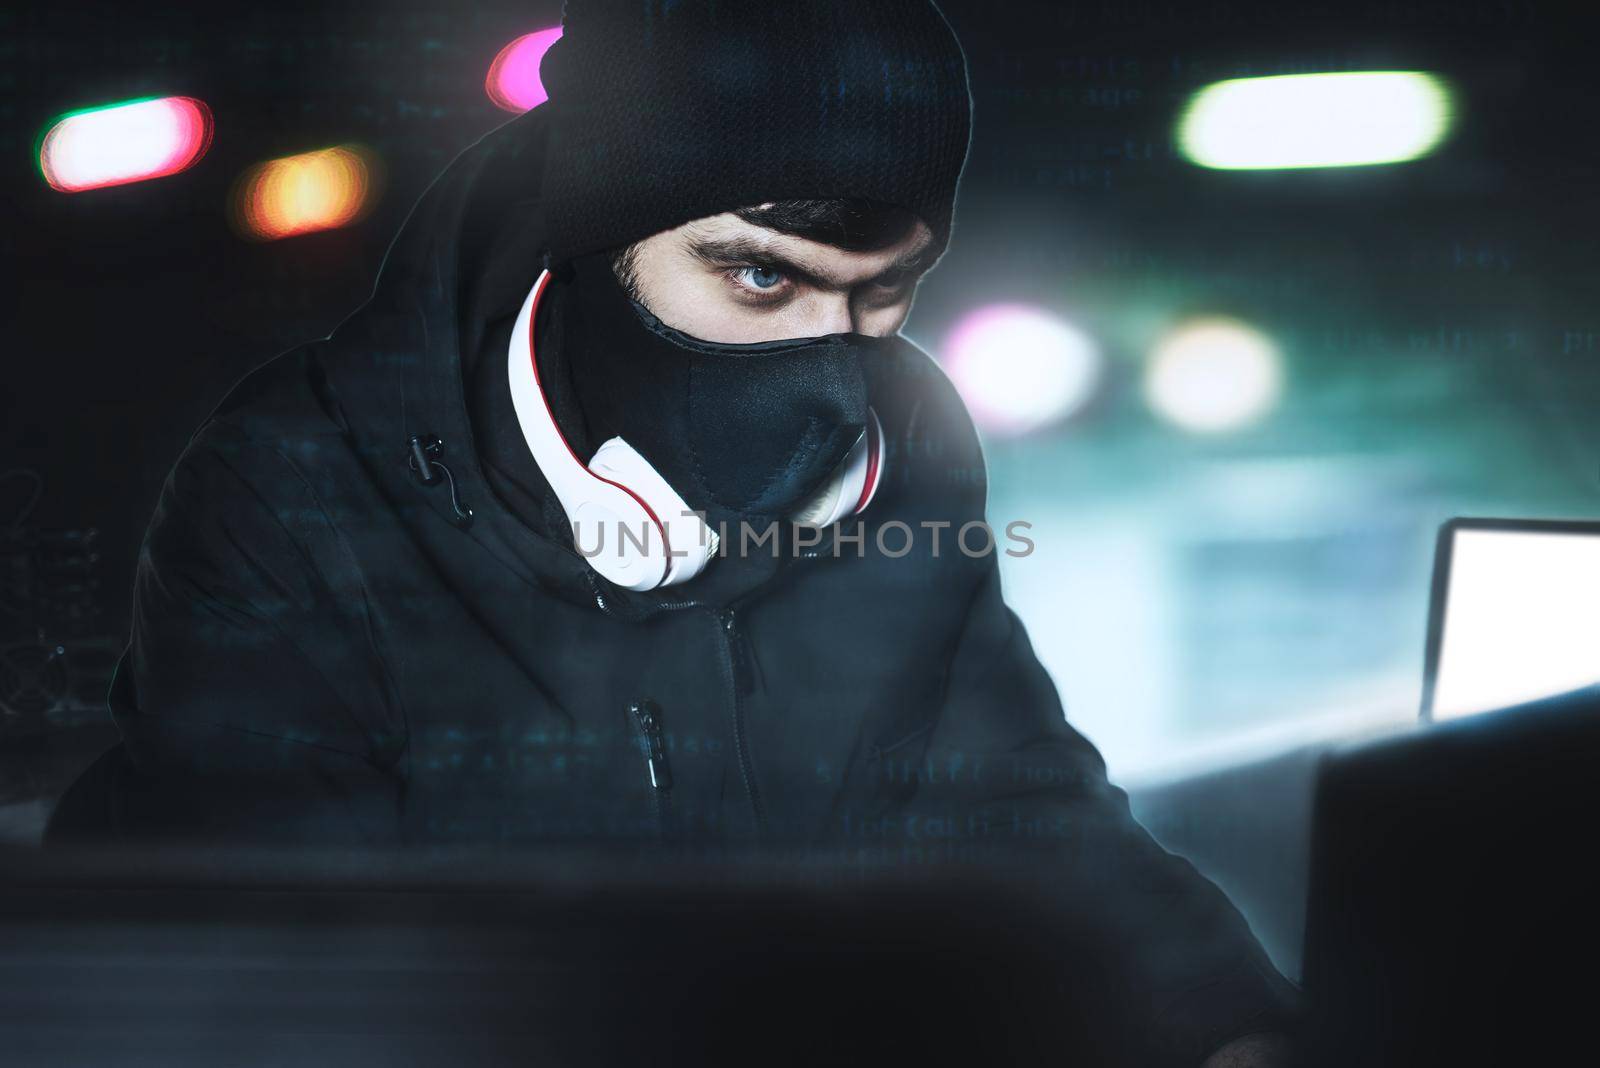 Angry computer hacker weared balaclava stealing data Via PC from His Underground Hideoutin front of black background and blue light. close portrait. hack concept